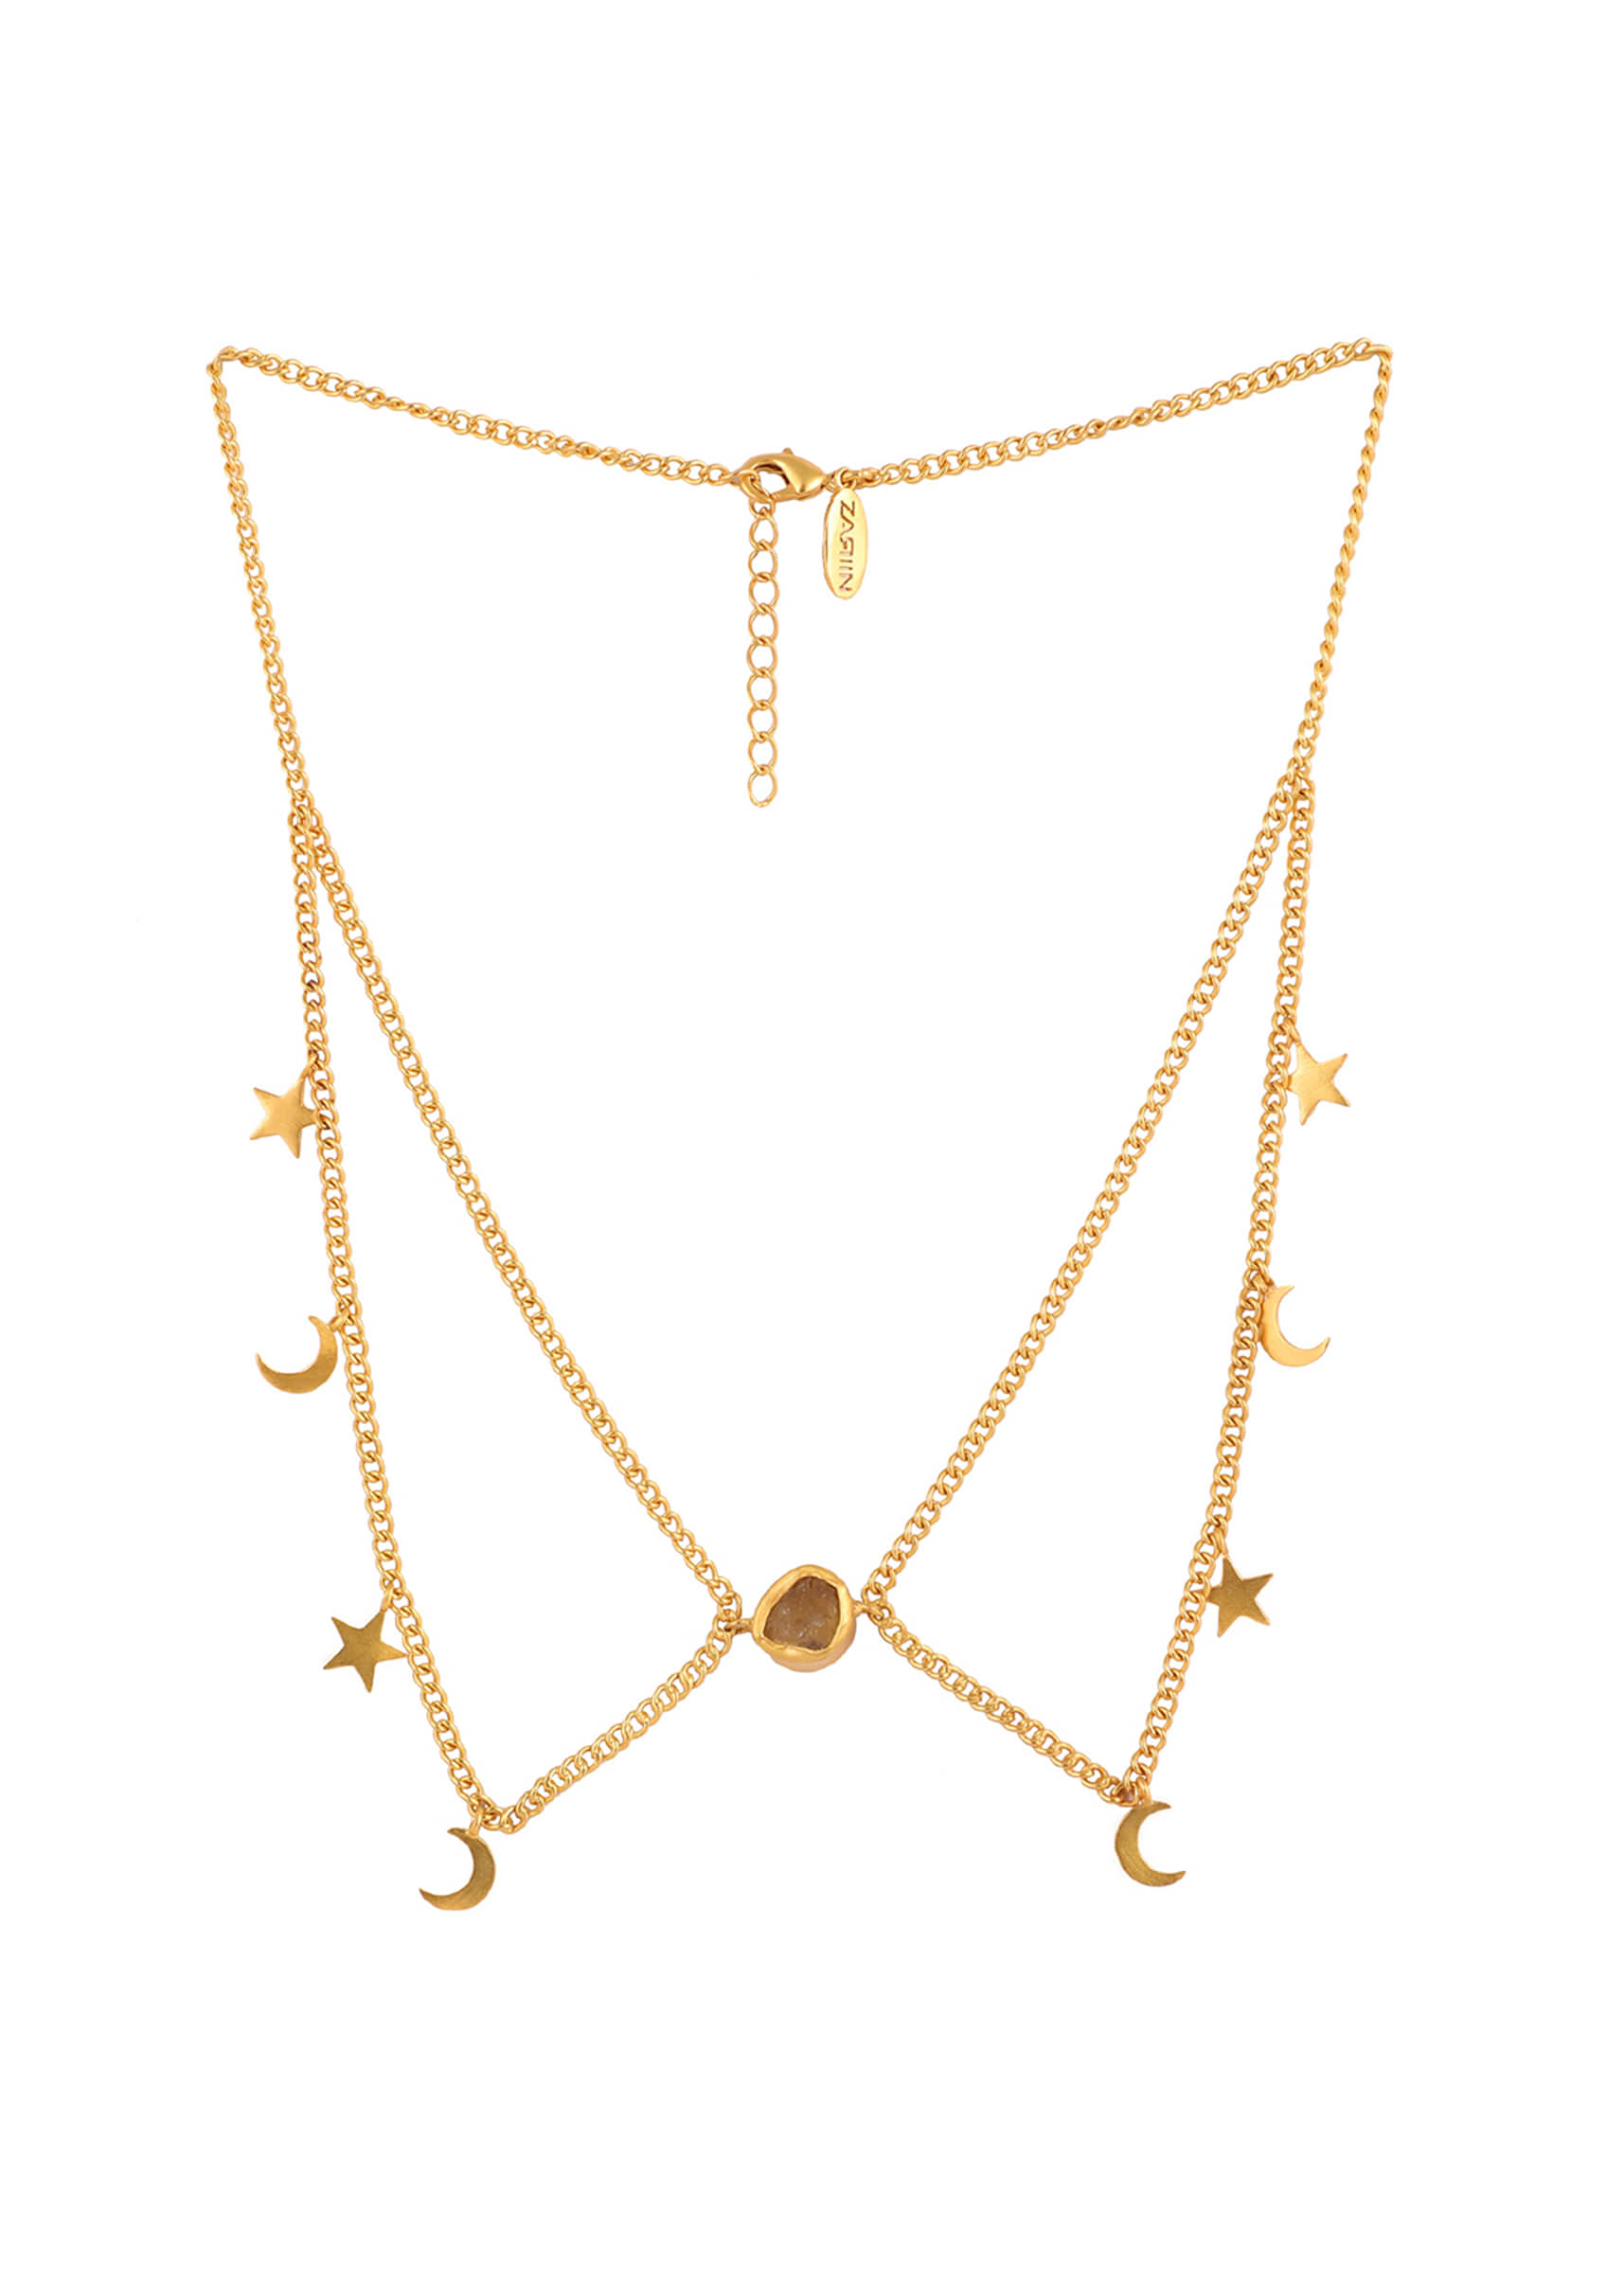 Gold Plated Necklace With Blue Topaz Pendant And Dangling Star And Moon Tassels By Zariin